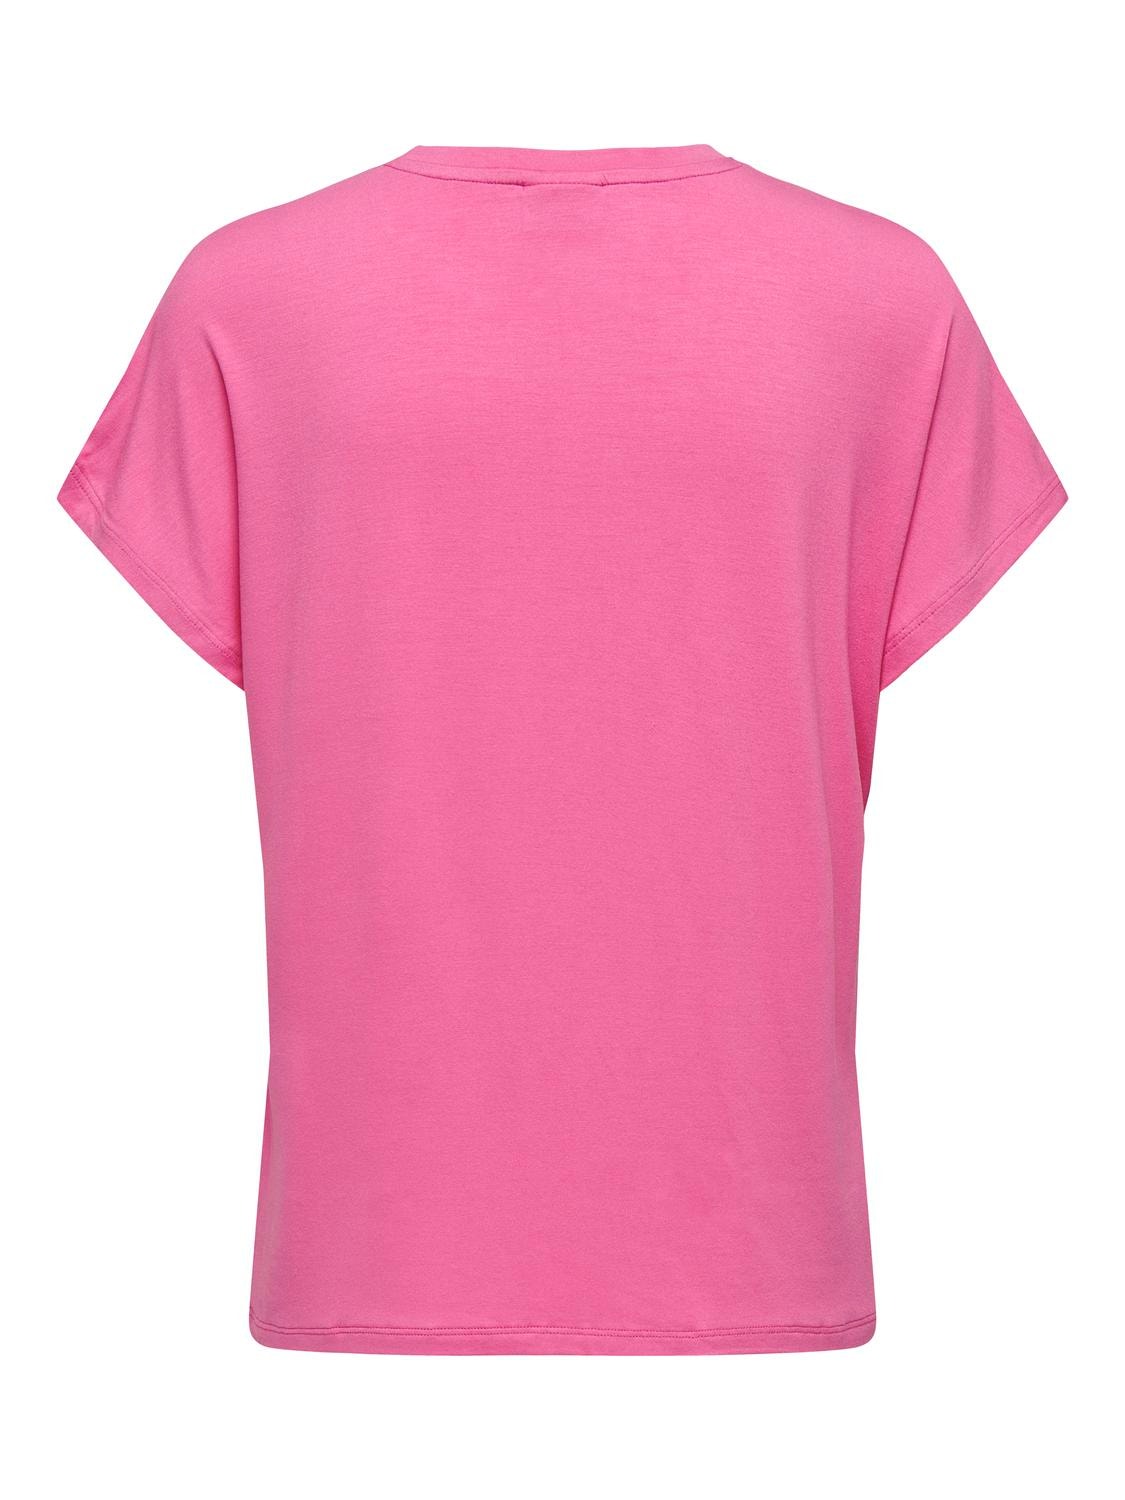 ONLY Solid colored T-shirt -Pink Power - 15257232